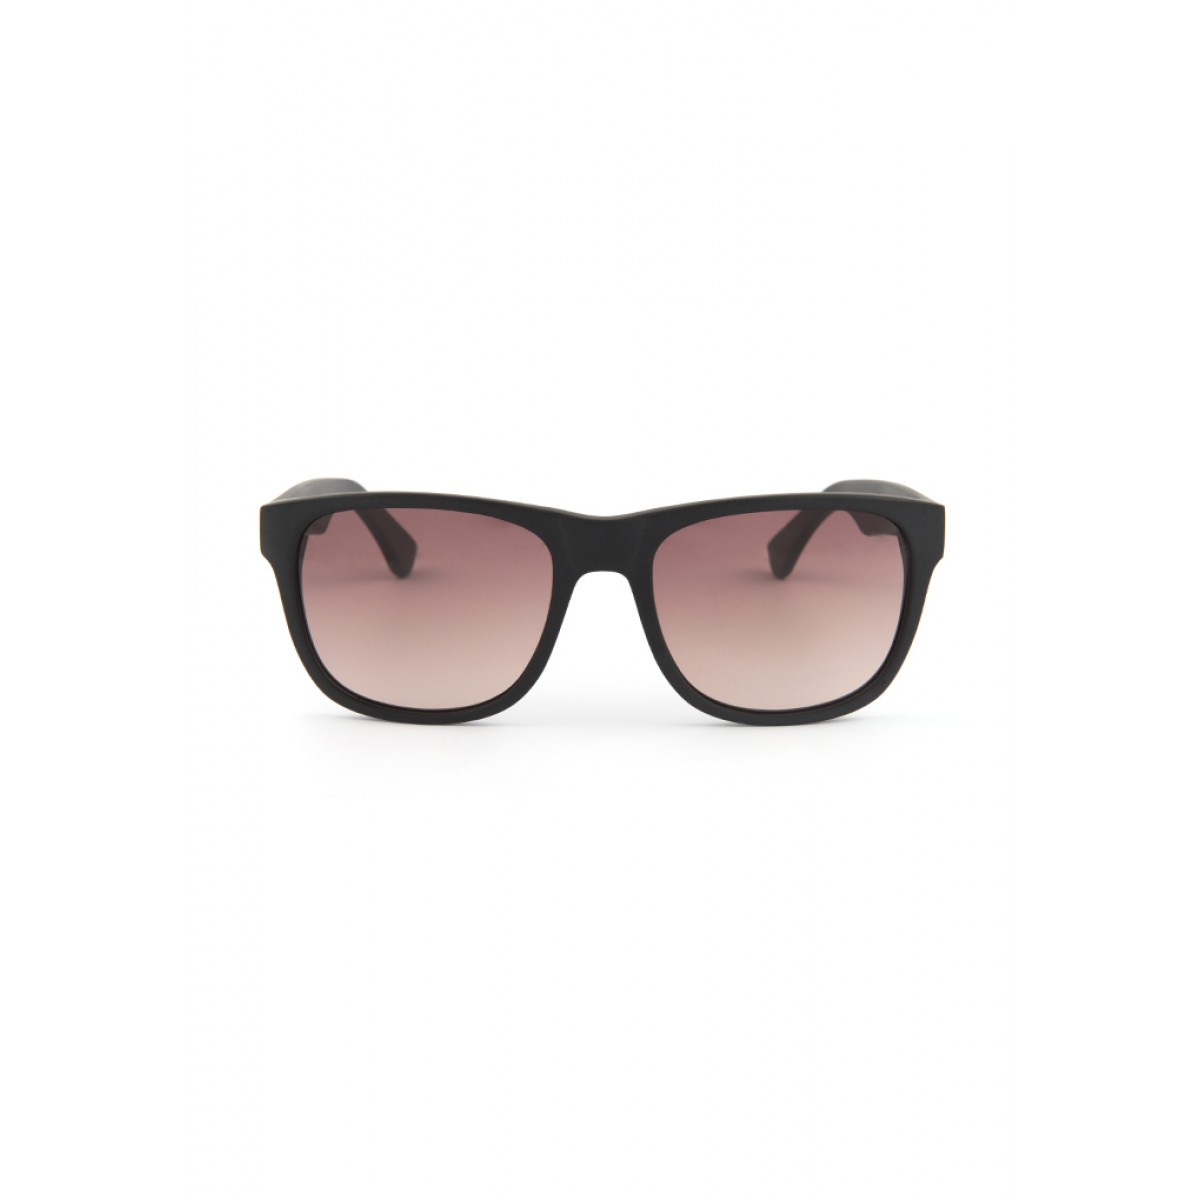 HOME IS WHERE YOUR HEART IS. – Acetat Sonnenbrille "BLACK BEAUTY II"